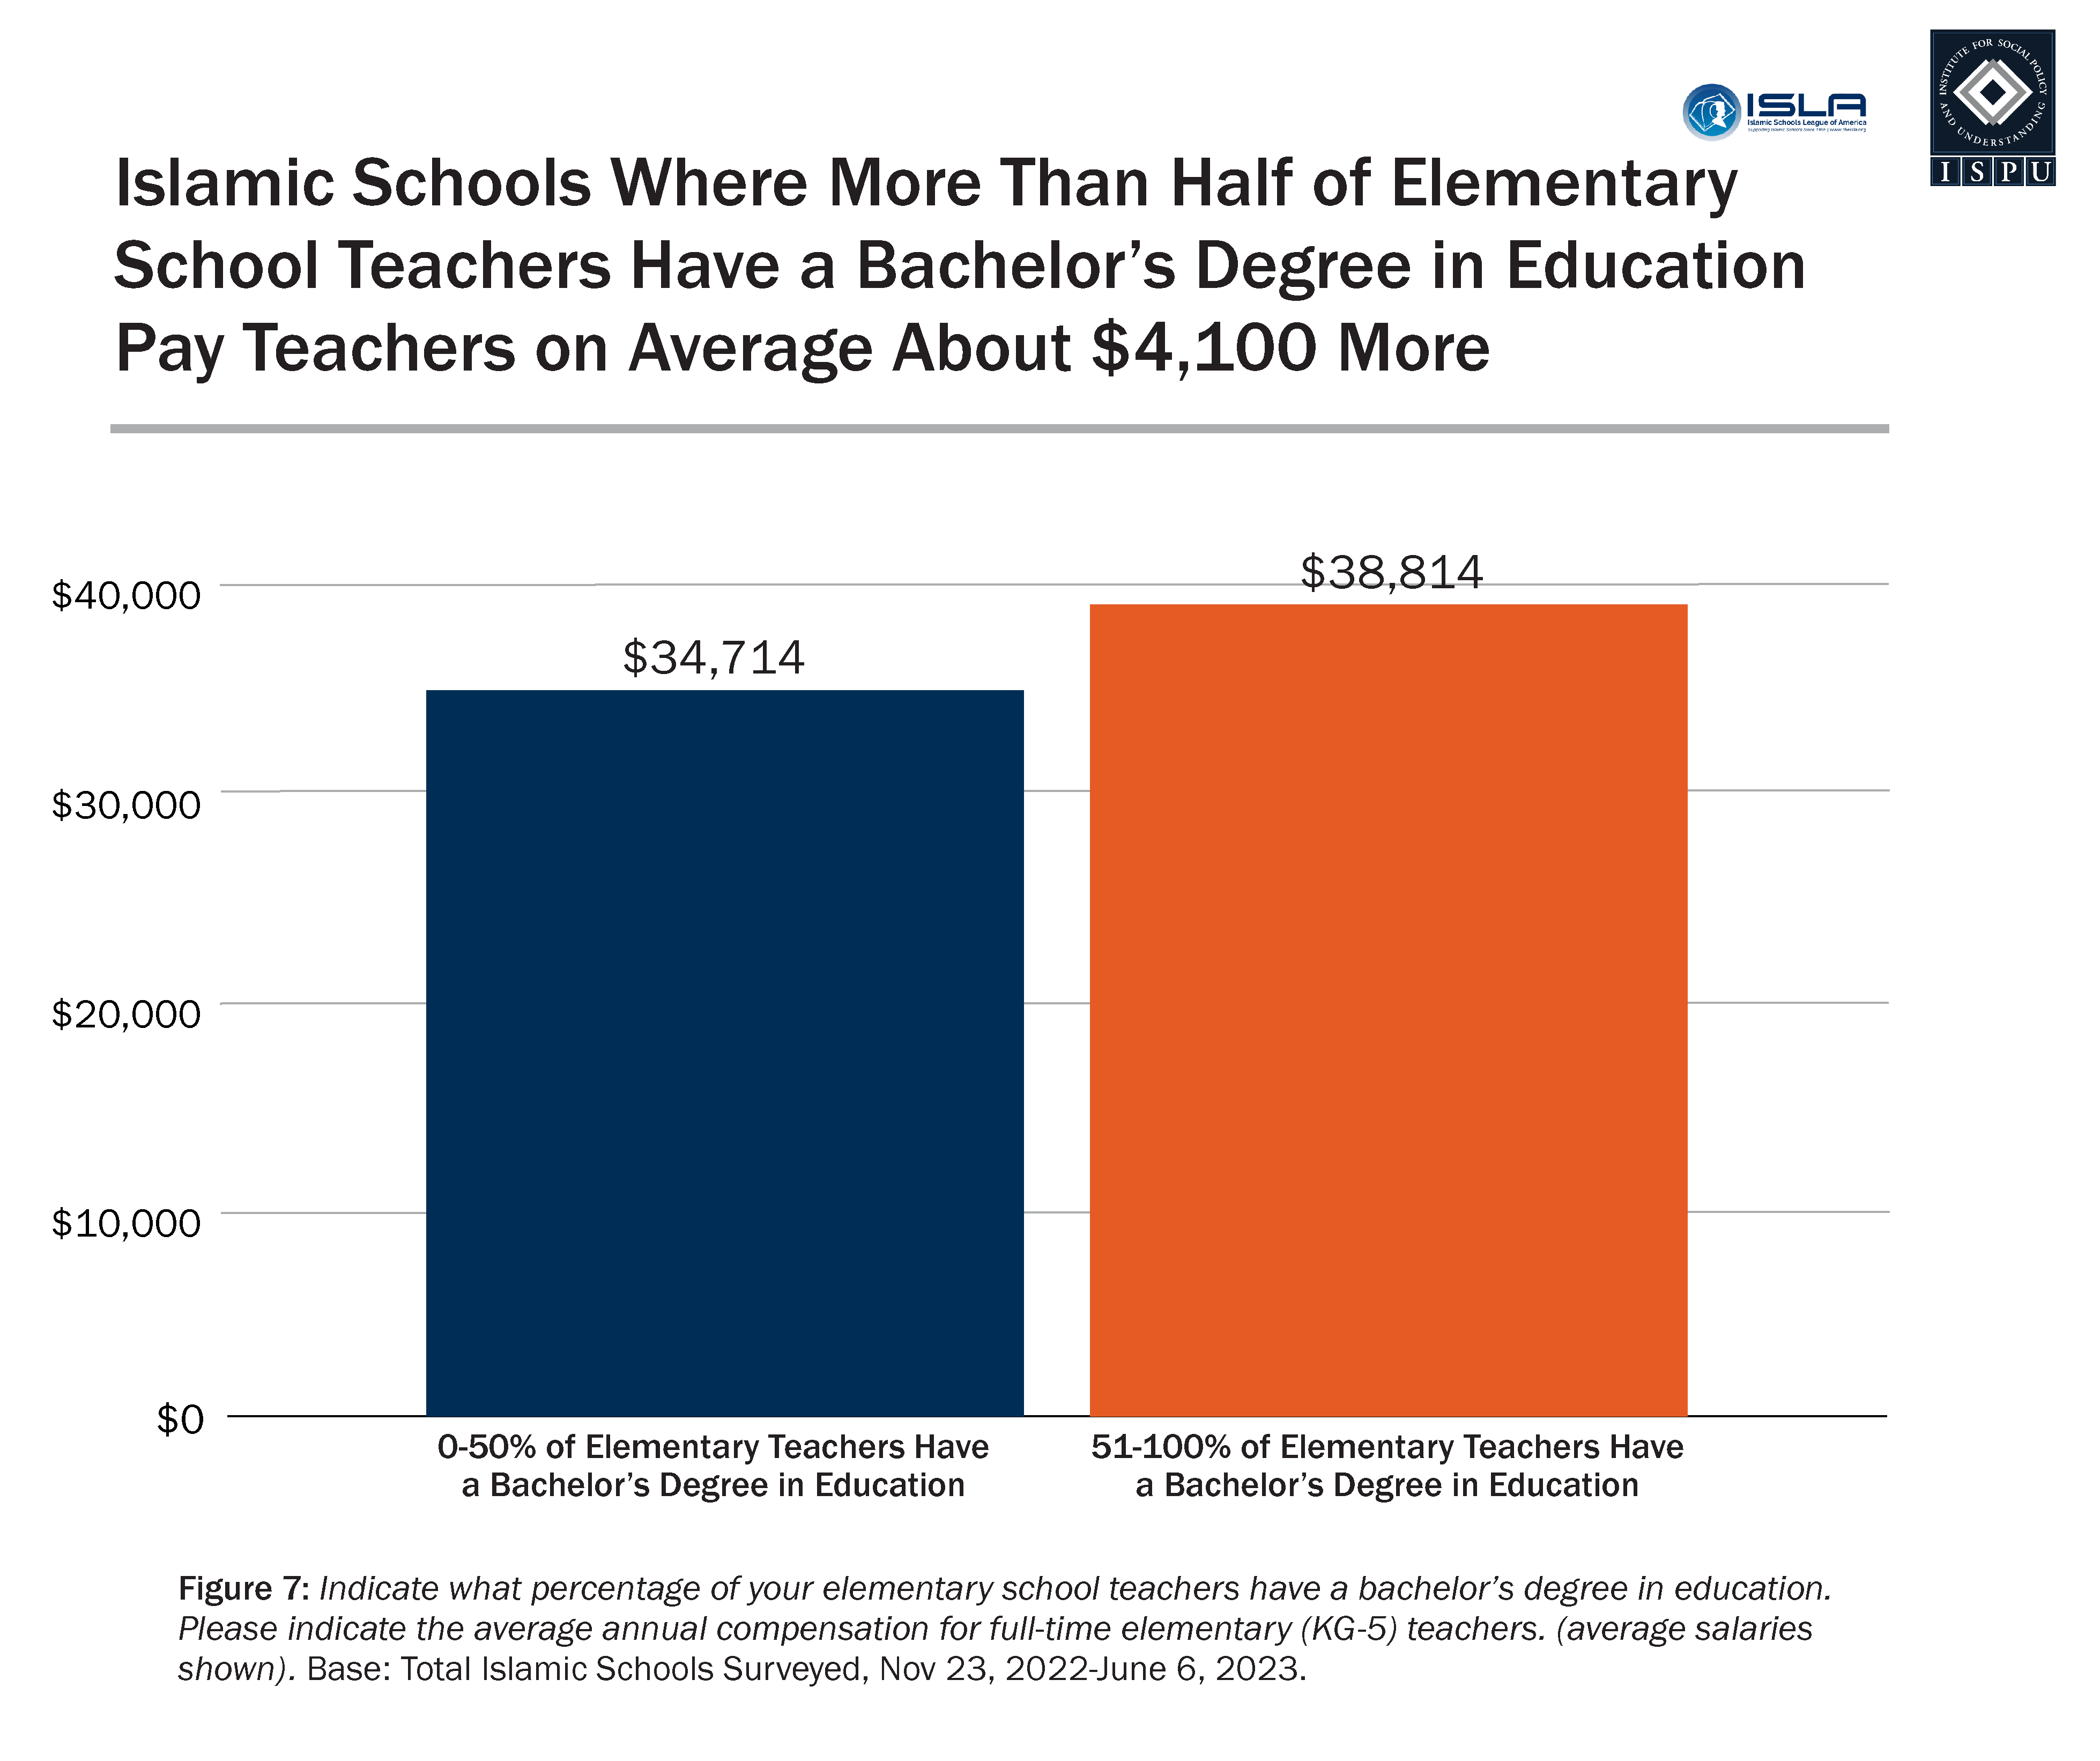 A column graph describing the average elementary school teacher salary by the percentage of elementary teachers with a bachelor’s degree in education.